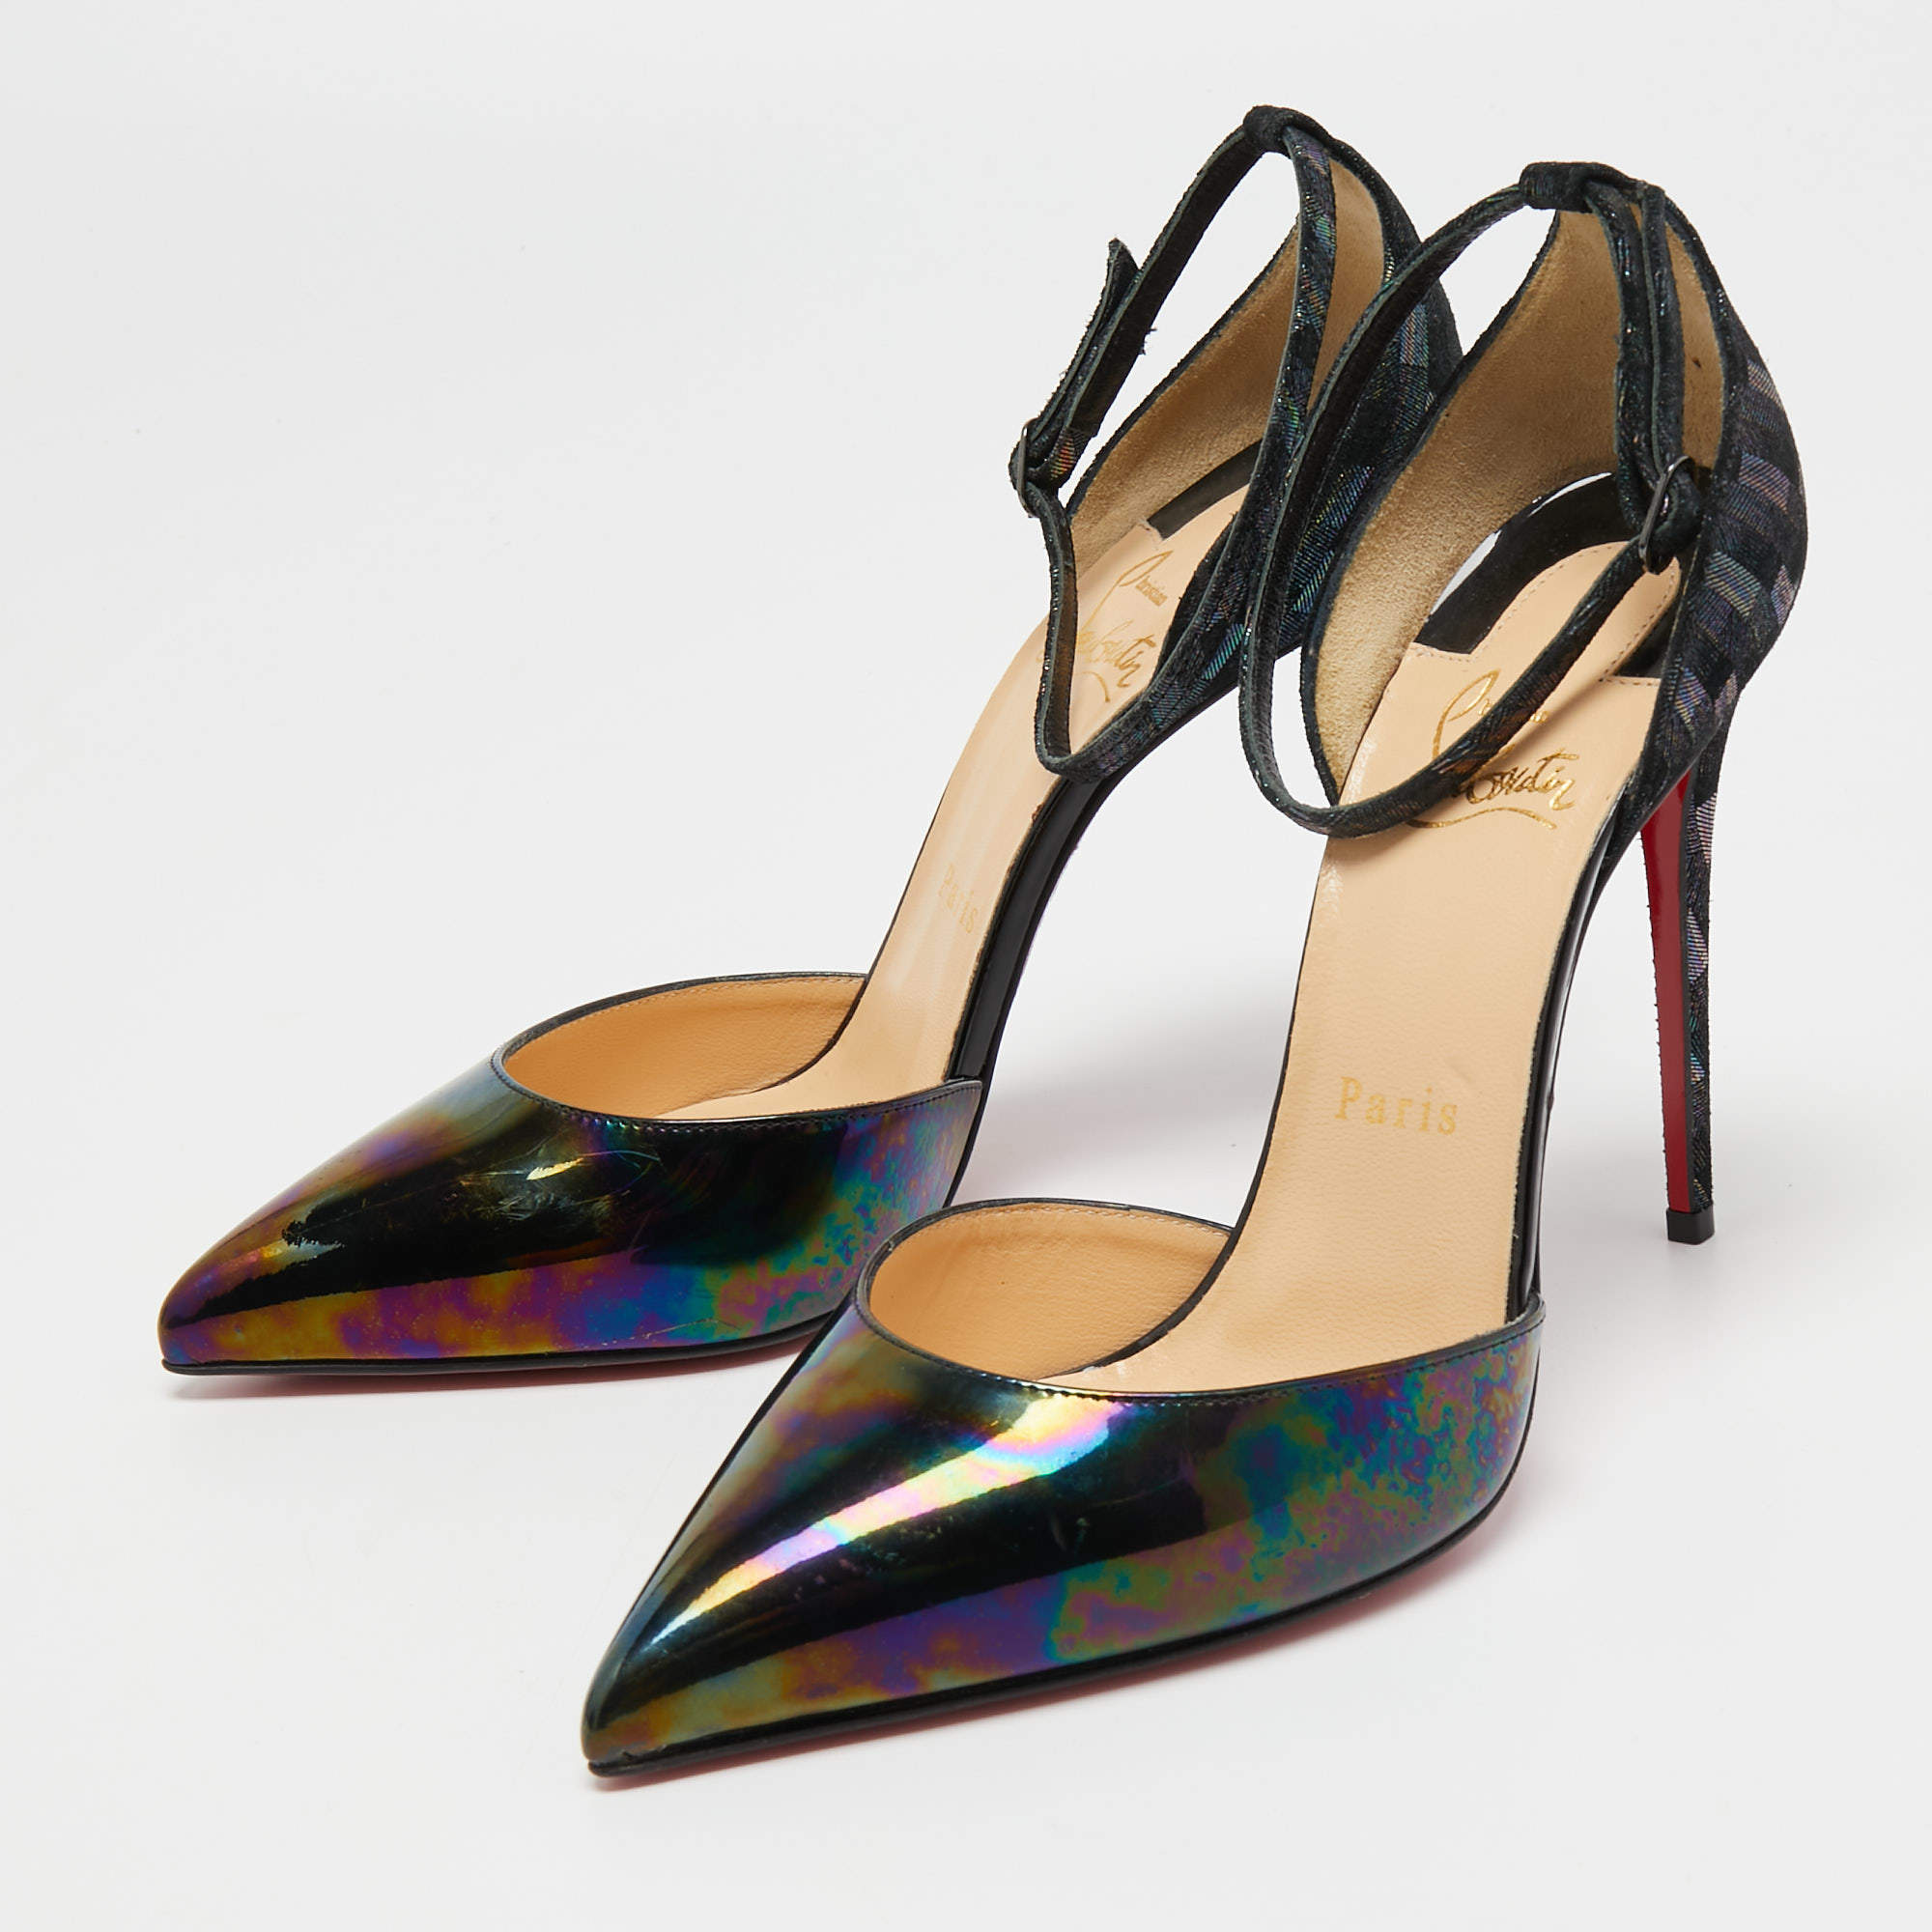 Christian Black Iridescent Leather and Suede Uptown Pumps Size 38.5 Christian Louboutin |